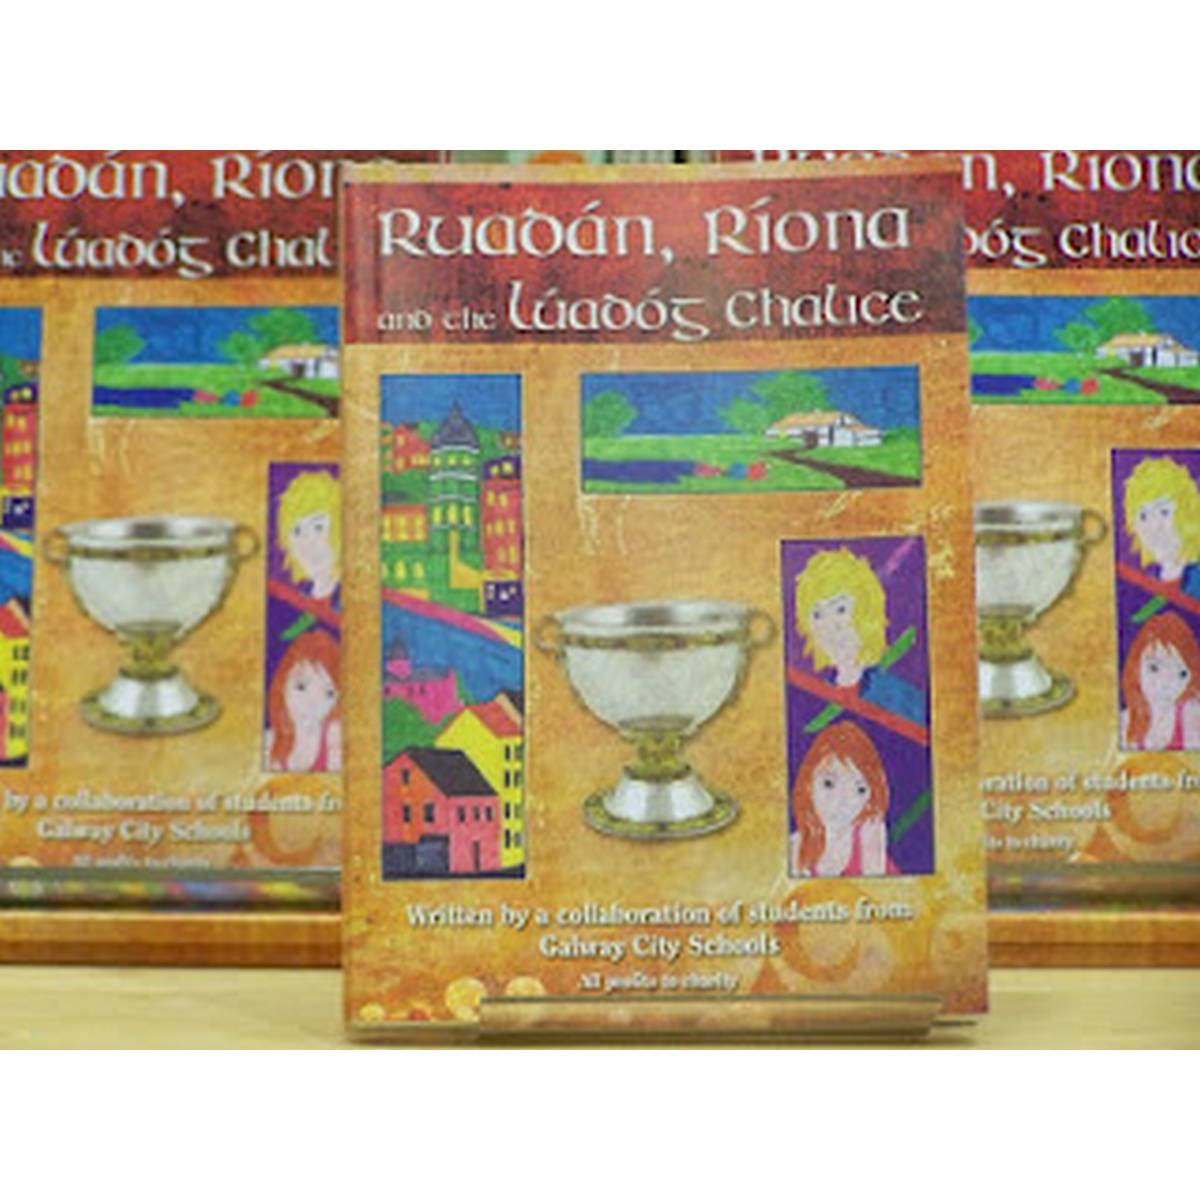 Ruadan, Riona and the Luadog Chalice: A Fictional Story Following the Adventure of Two Children Who Find a Magic Chalice